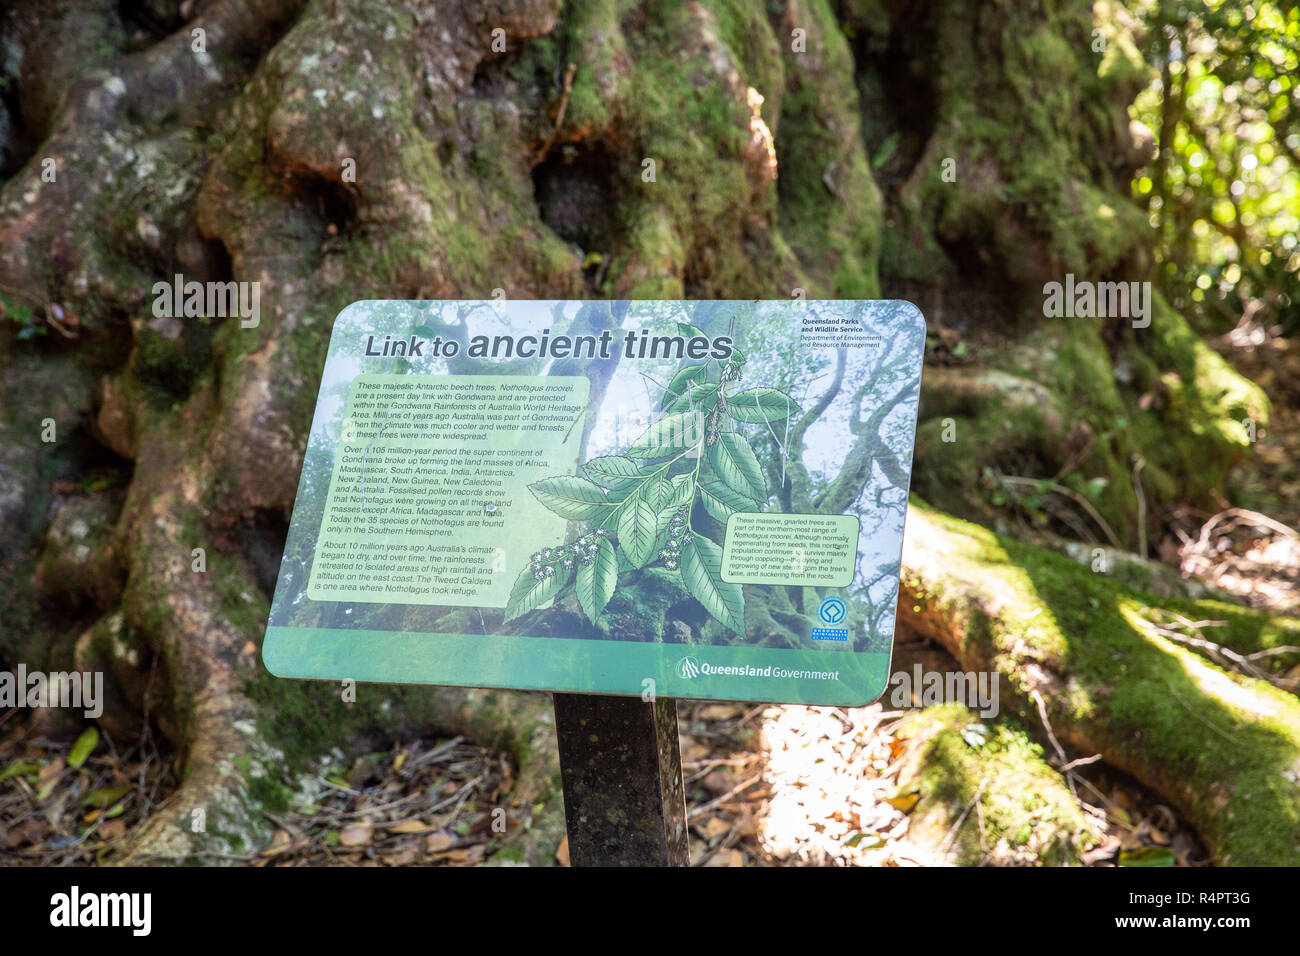 Sign for the Antarctic trees from ancient times in Springbrook national park,Queensland,Australia Stock Photo